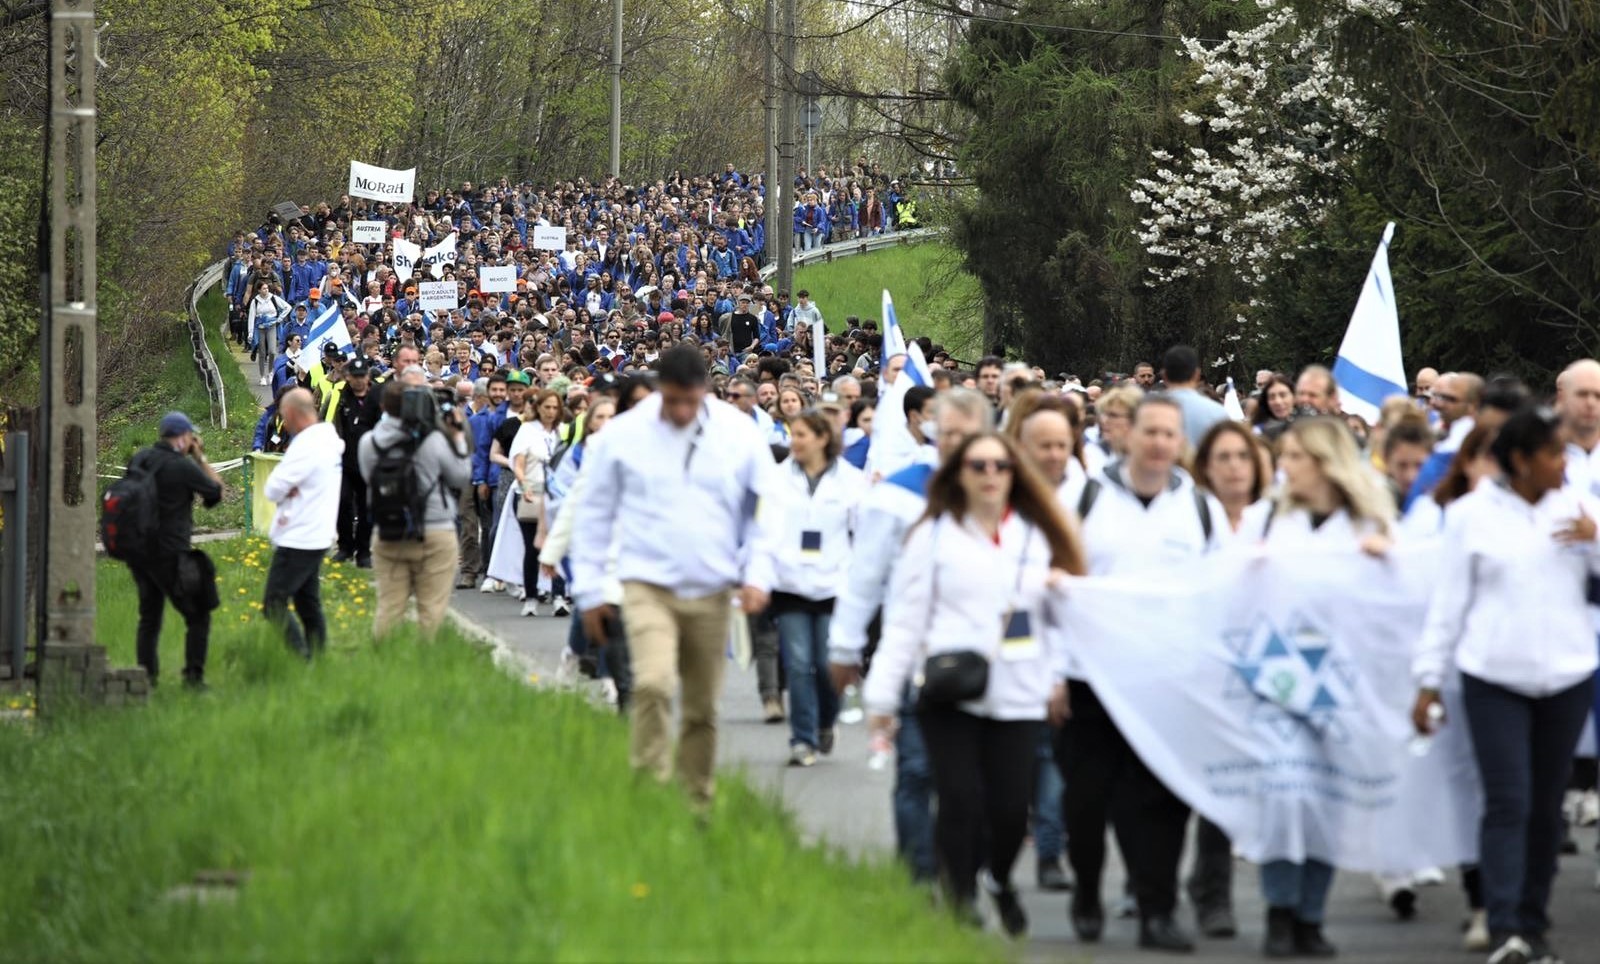 March of Living to mark 80 years since destruction of Hungarian Jewry